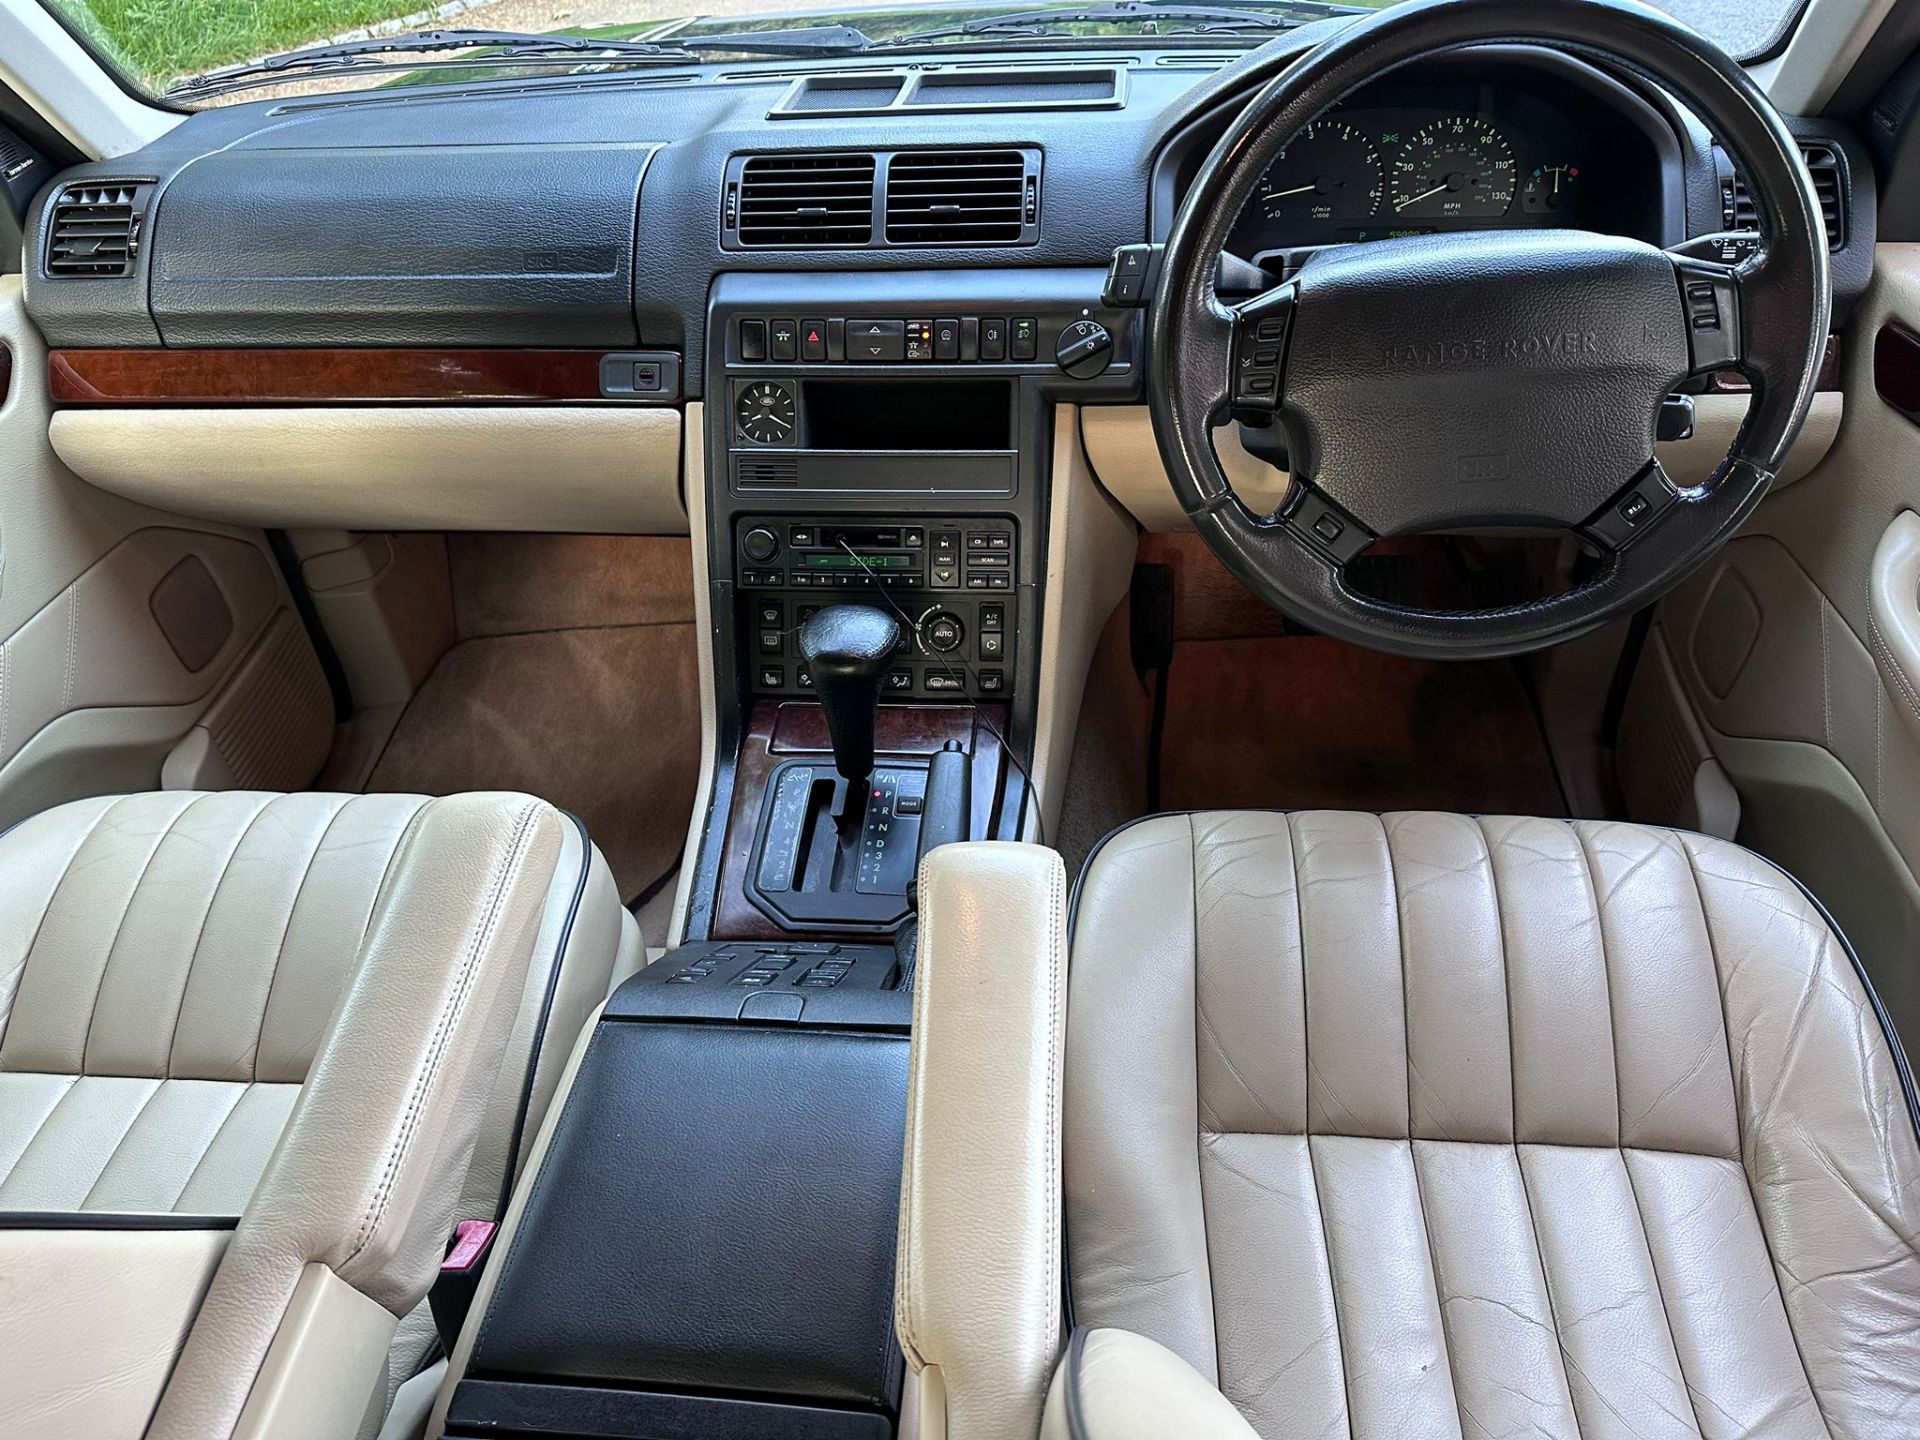 1999 RANGE ROVER VOGUE 4.6 V8 P38 (THOR ENGINE) - 59K MILES FROM NEW - Image 12 of 13